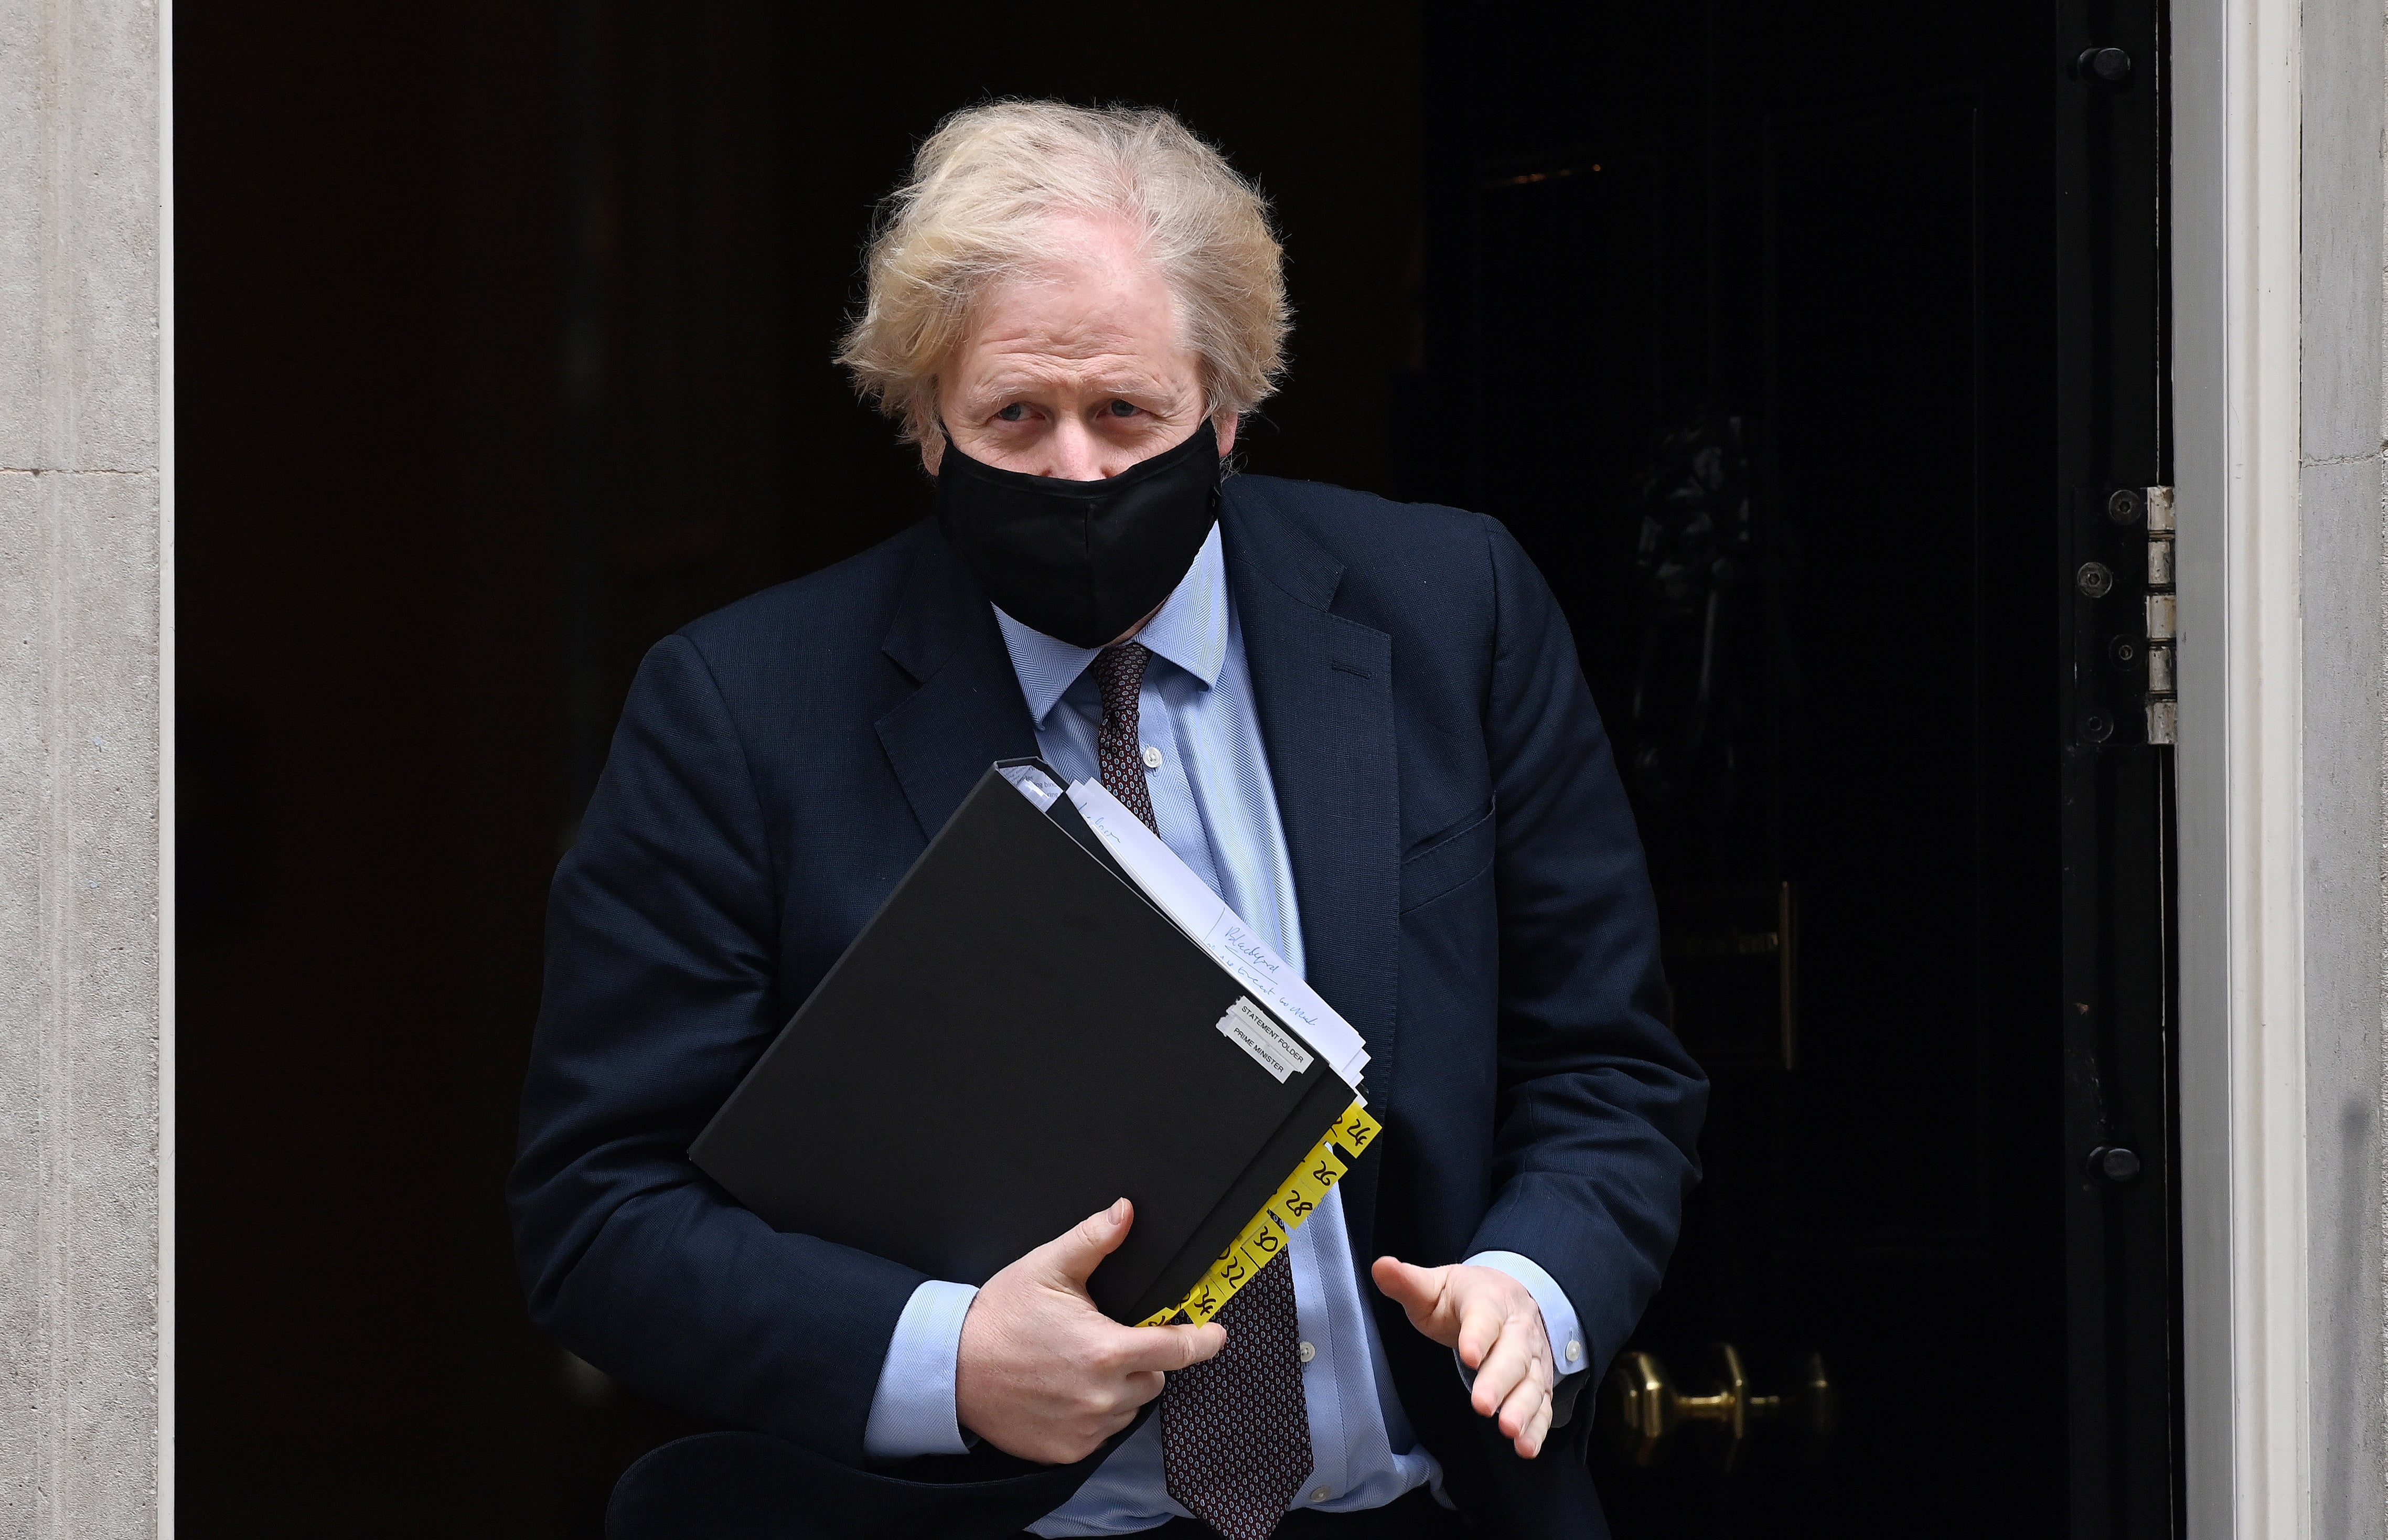 Boris Johnson leaves No 10 to make an intensely political statement in parliament